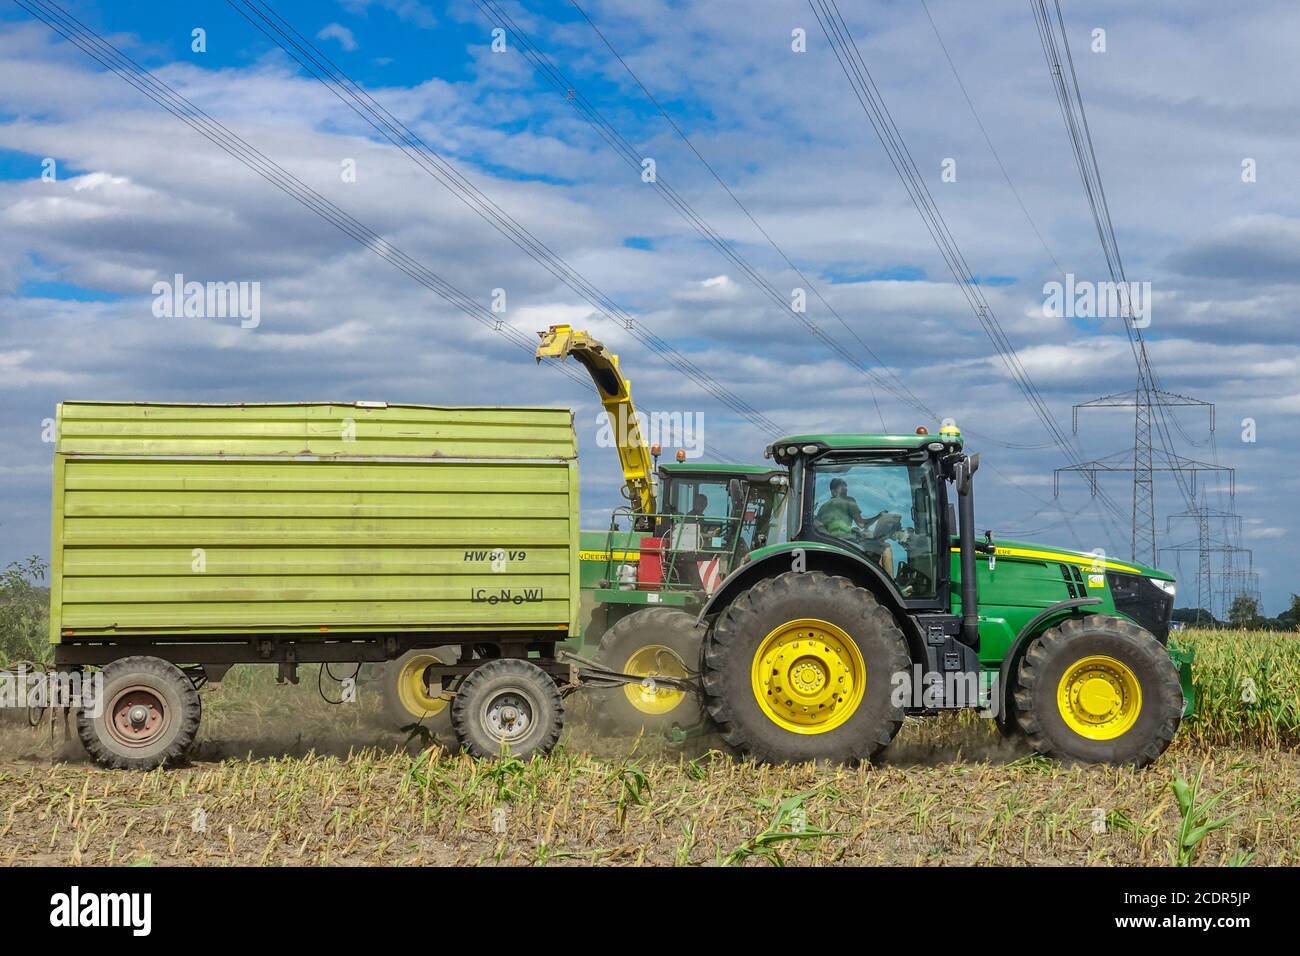 Agriculture farming harvesting corn under high-voltage lines and pylons John Deere tractor Stock Photo